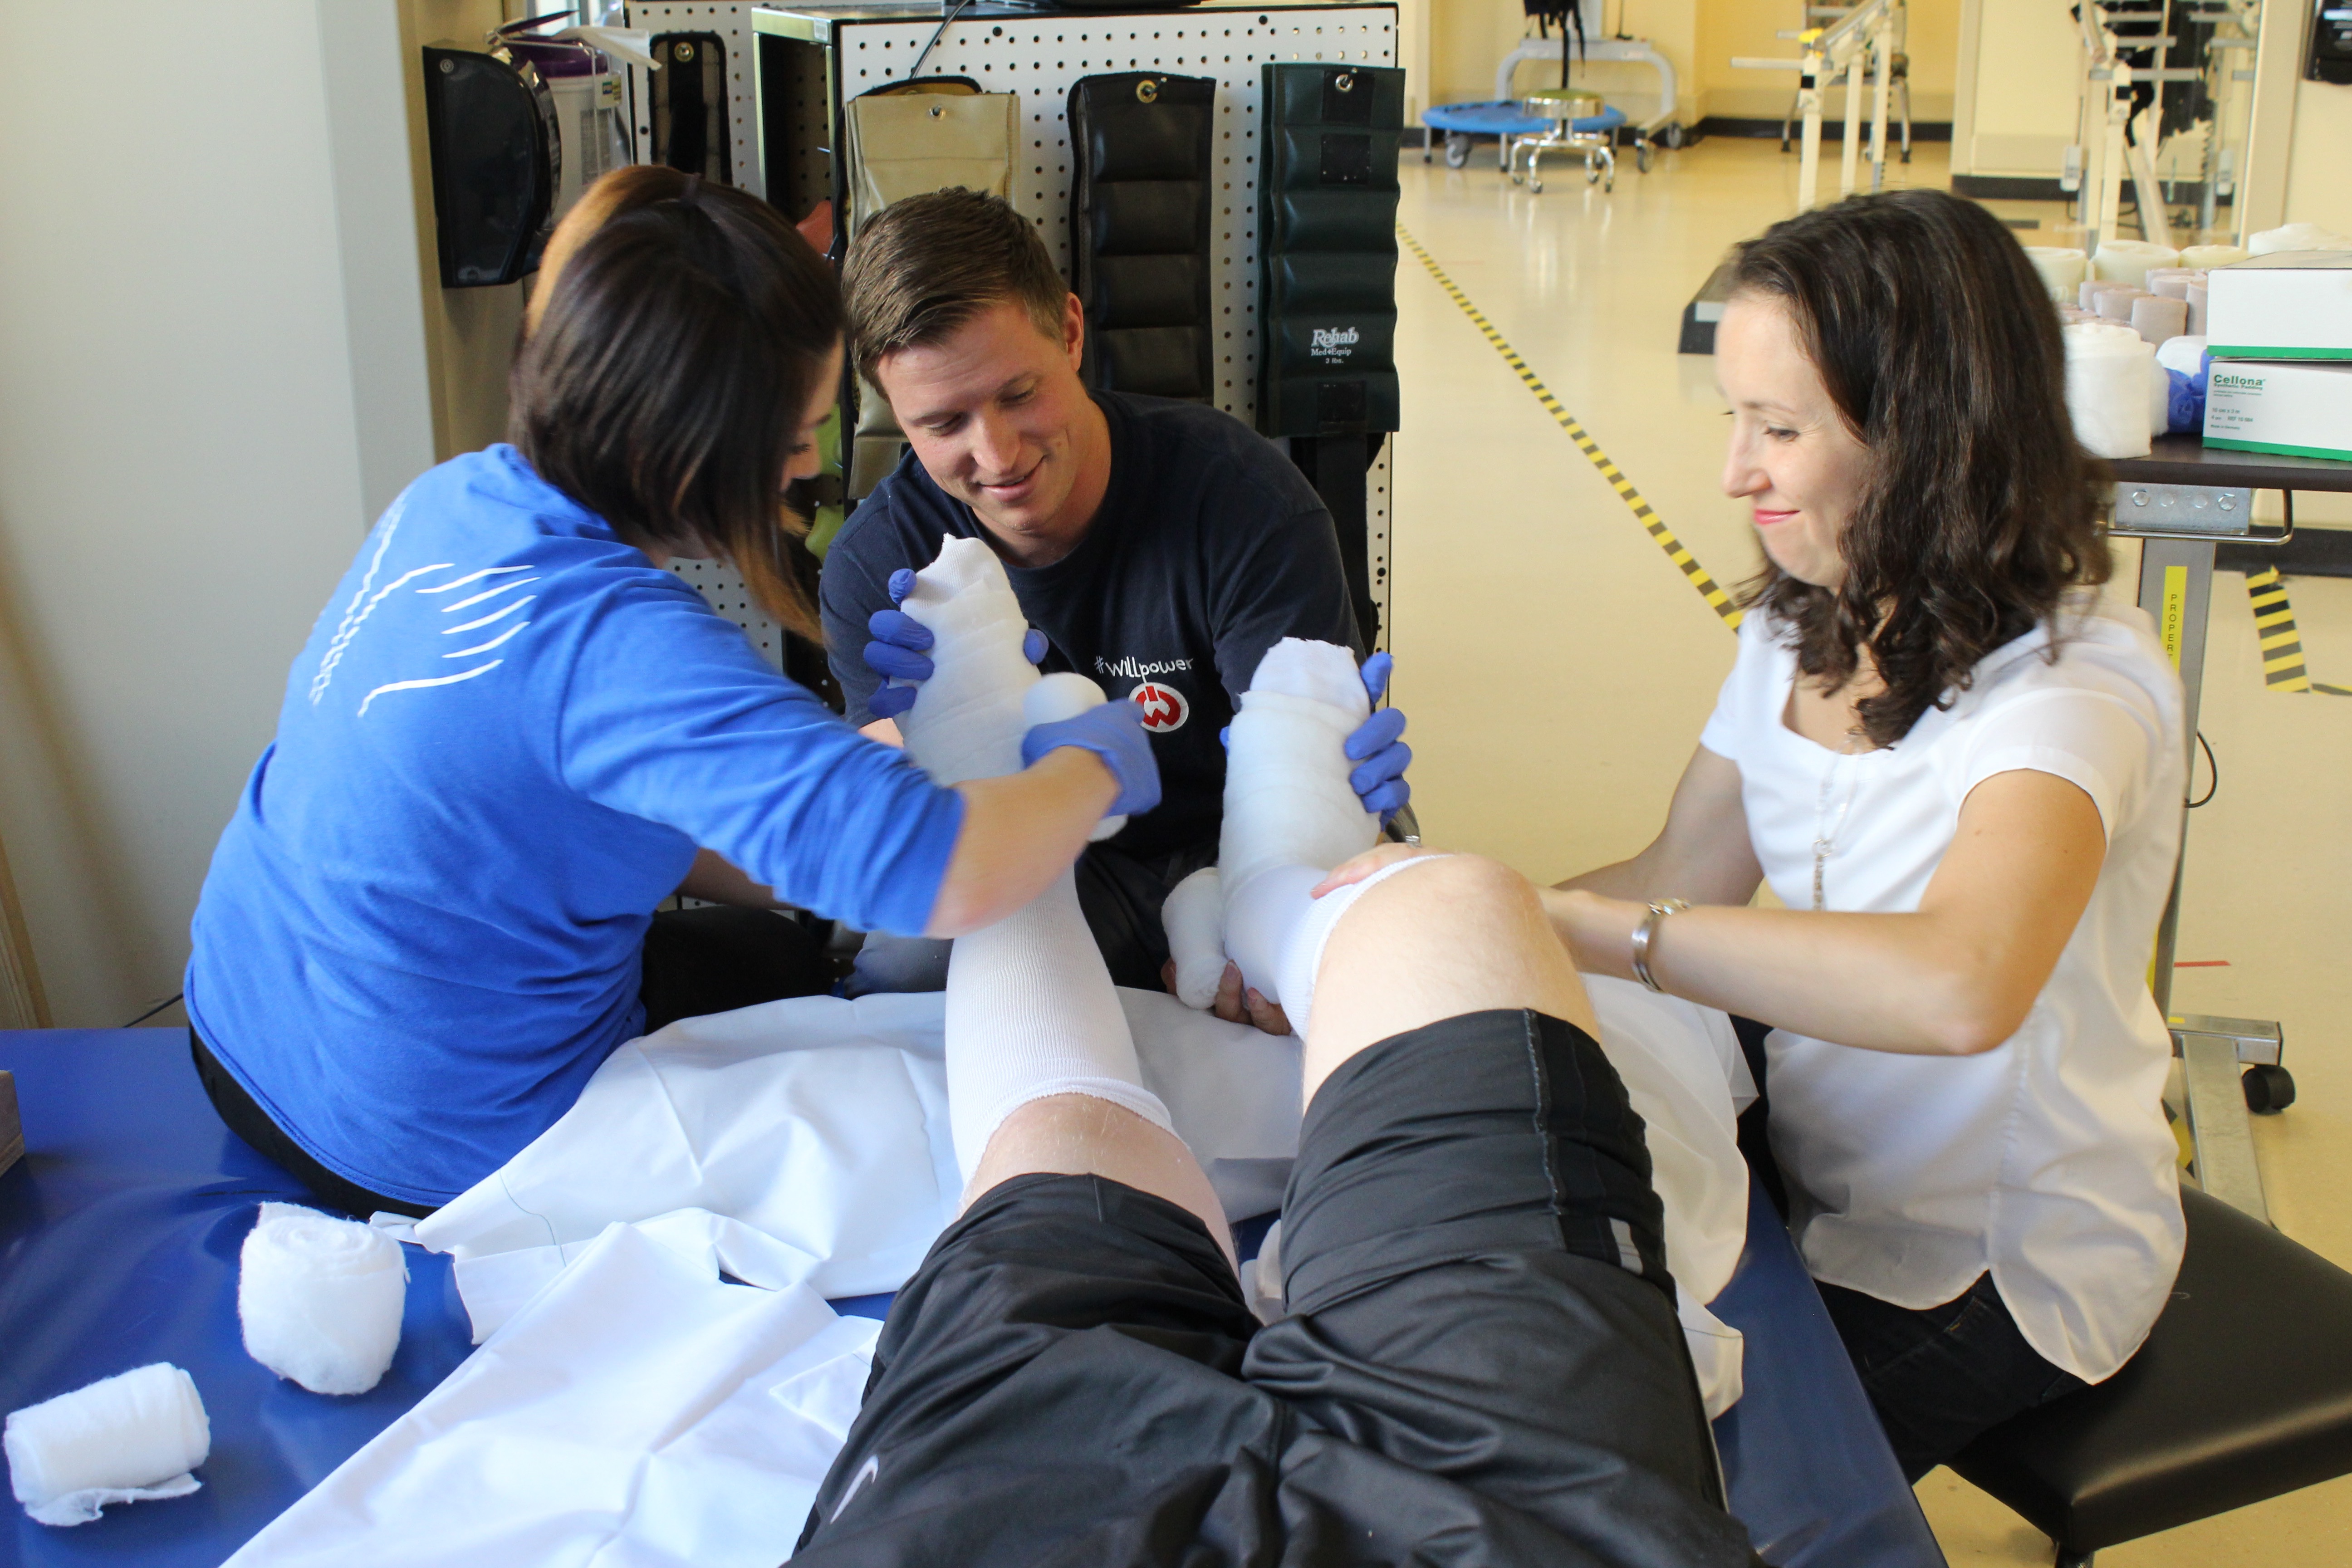 Three therapists change the bandages on a patient's legs